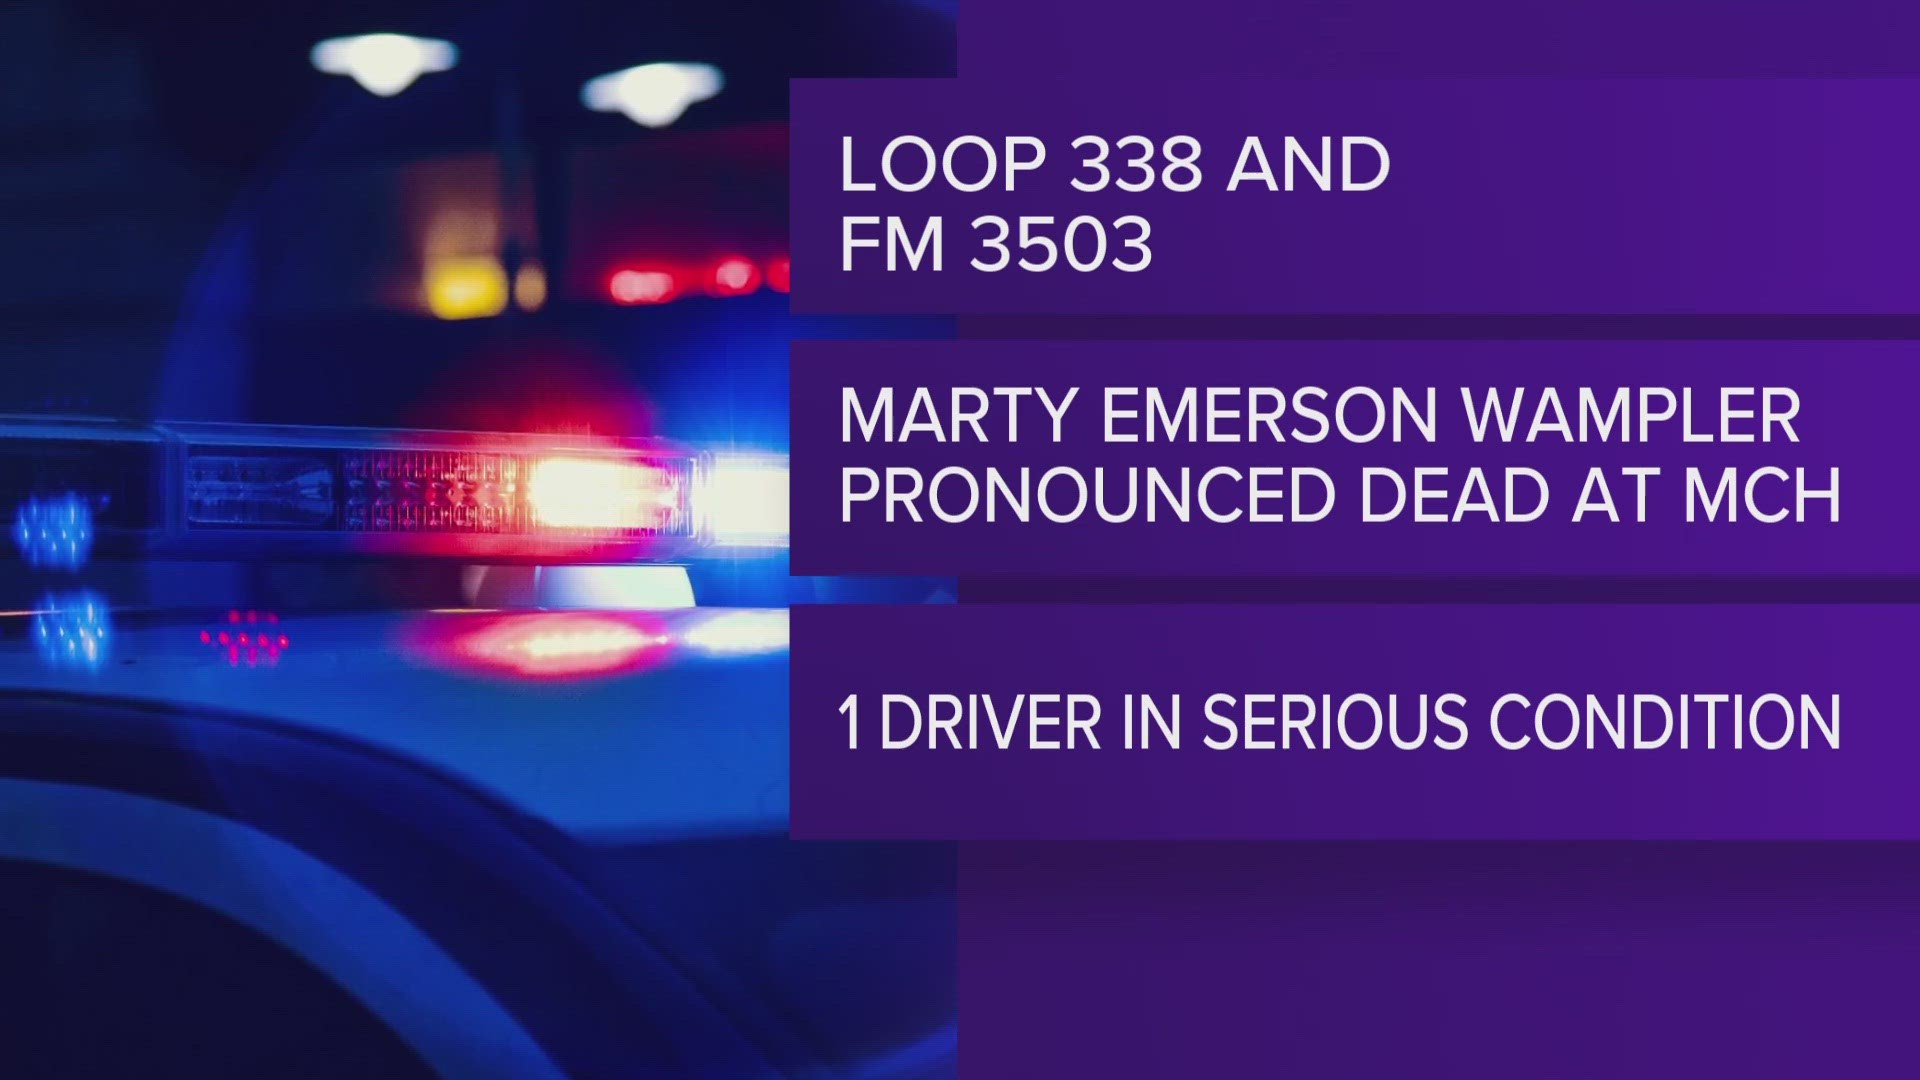 Marty Emerson Wampler, 63, was transported to Medical Center Hospital after a brutal crash in Ector County. Wampler later died according to MCH medical staff.